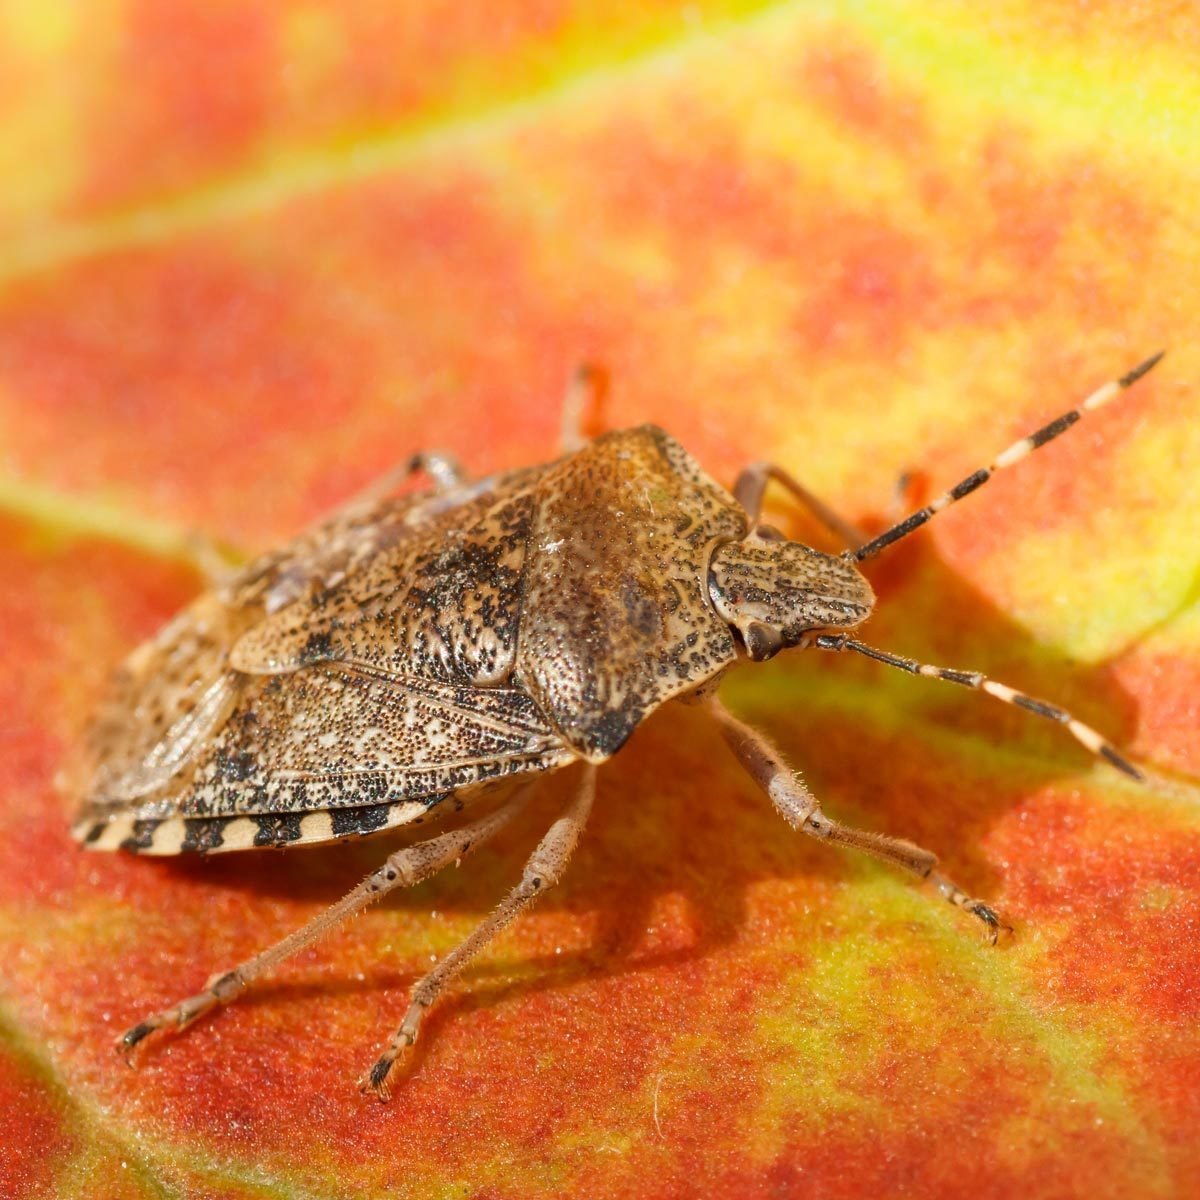 How to Get Rid of Stink Bugs in Your Home and Garden